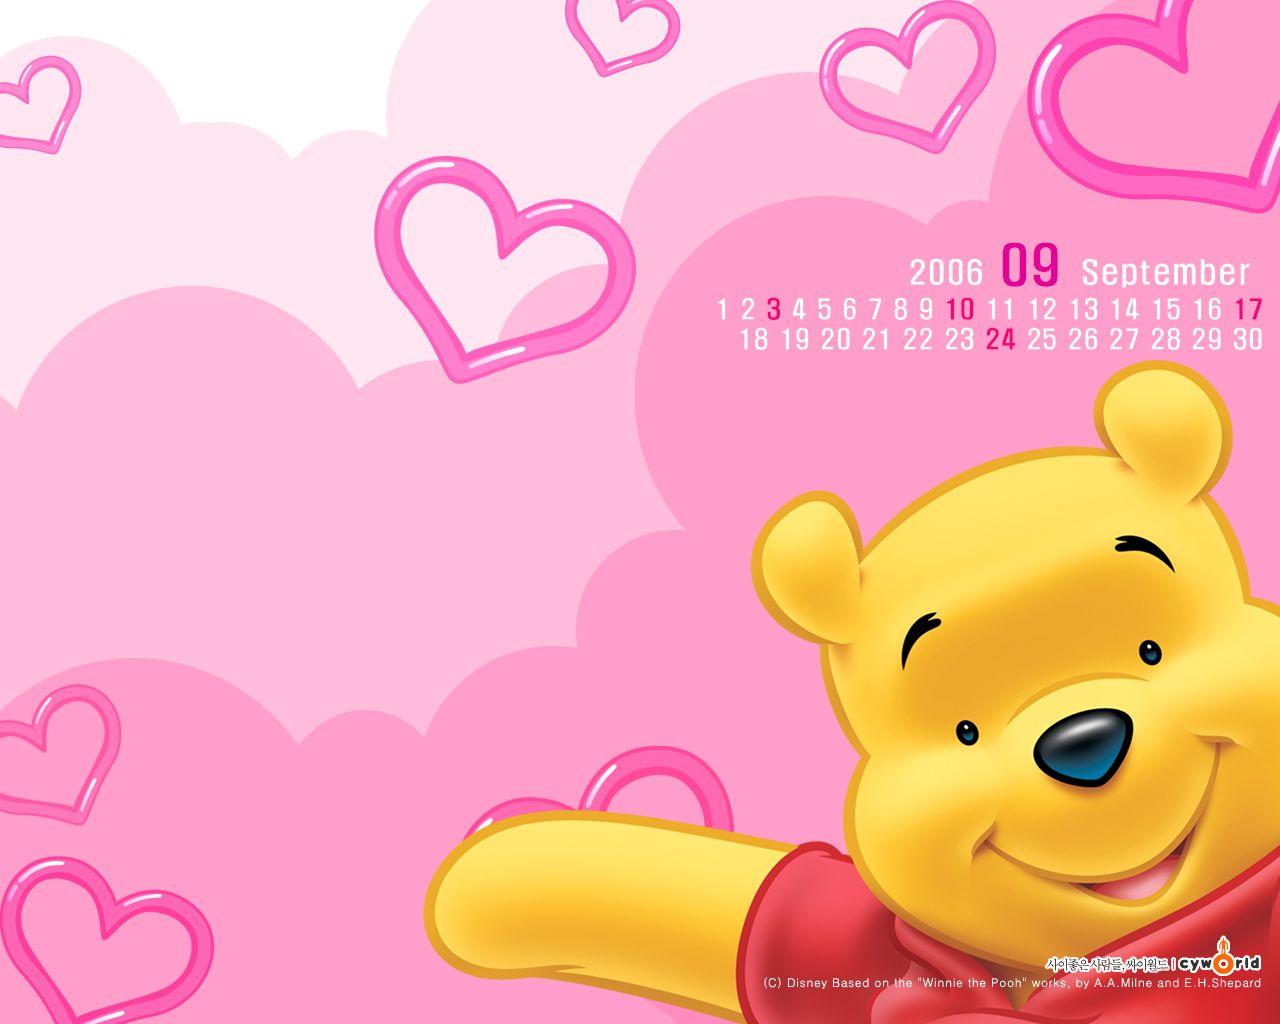 Winnie the Pooh Cartoon Wallpaper Image for iPhone